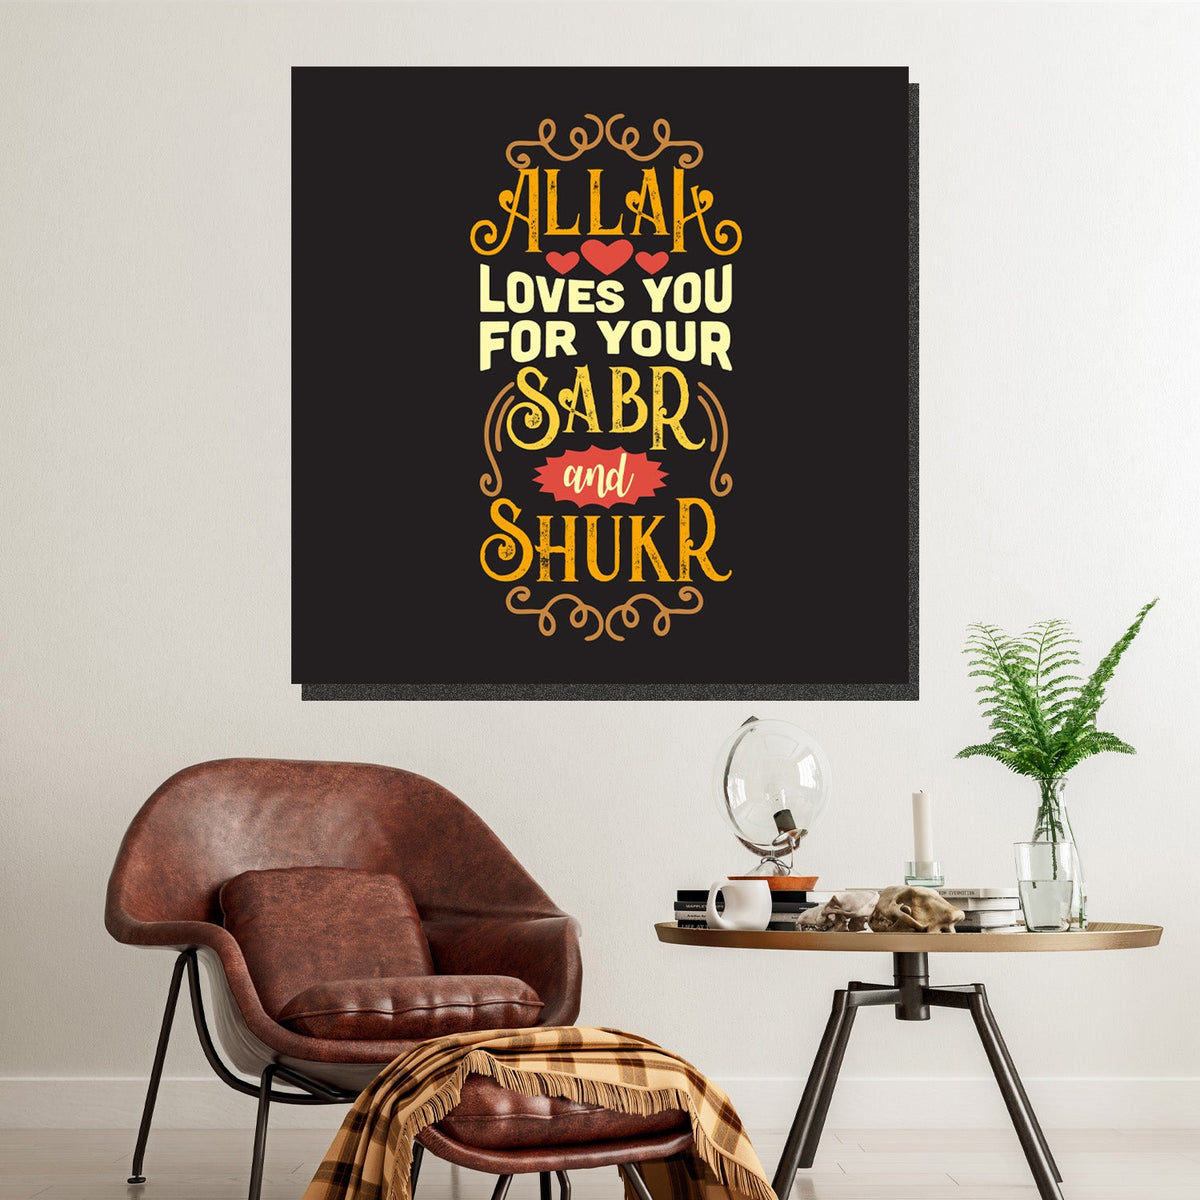 https://cdn.shopify.com/s/files/1/0387/9986/8044/products/AllahLovesYouCanvasArtprintStretched-4.jpg